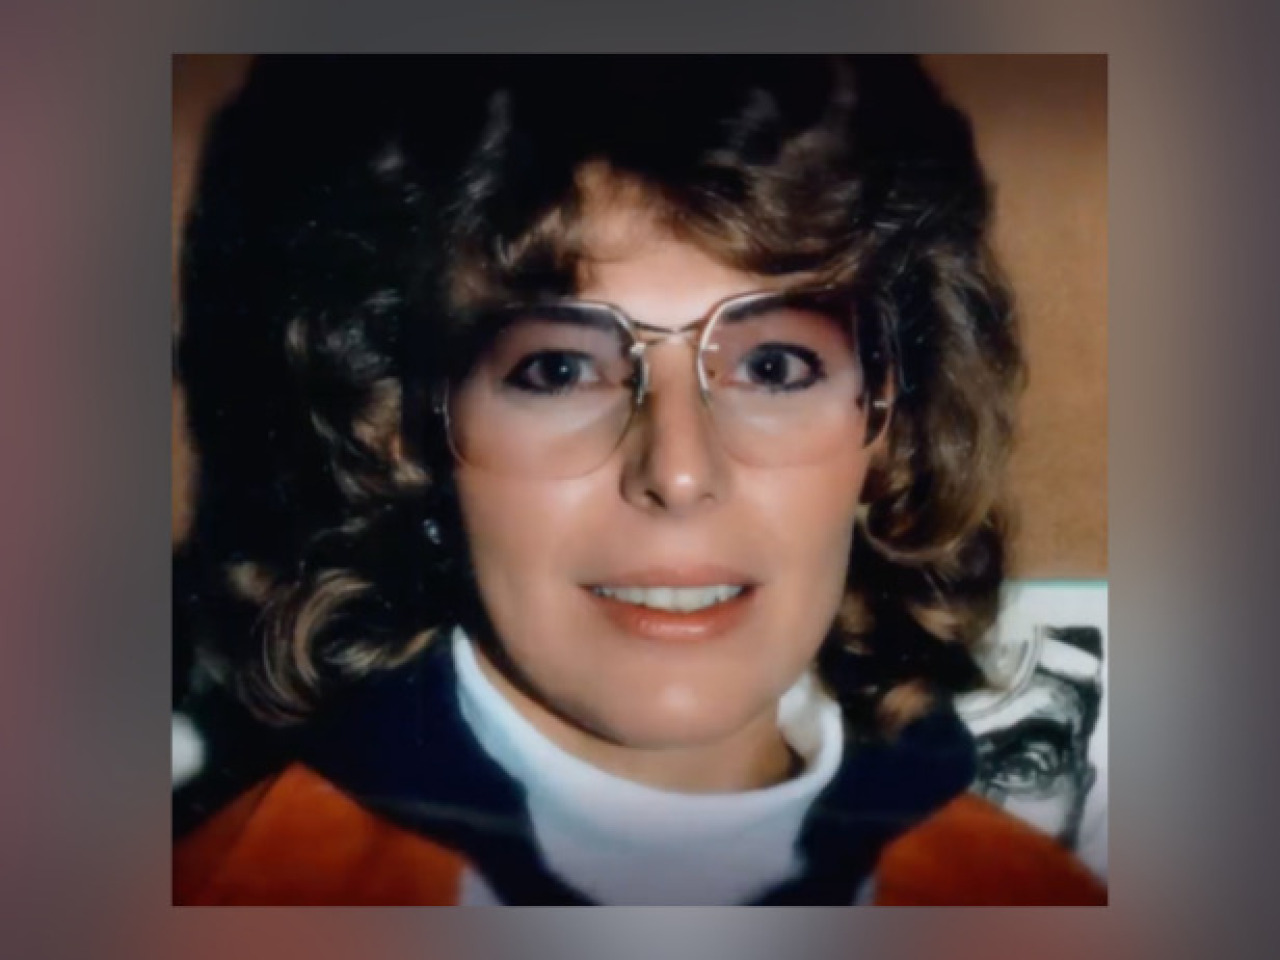 [IMAGE] Woman Calls Police 'Superheroes' For Capturing Killer 34 Years ...